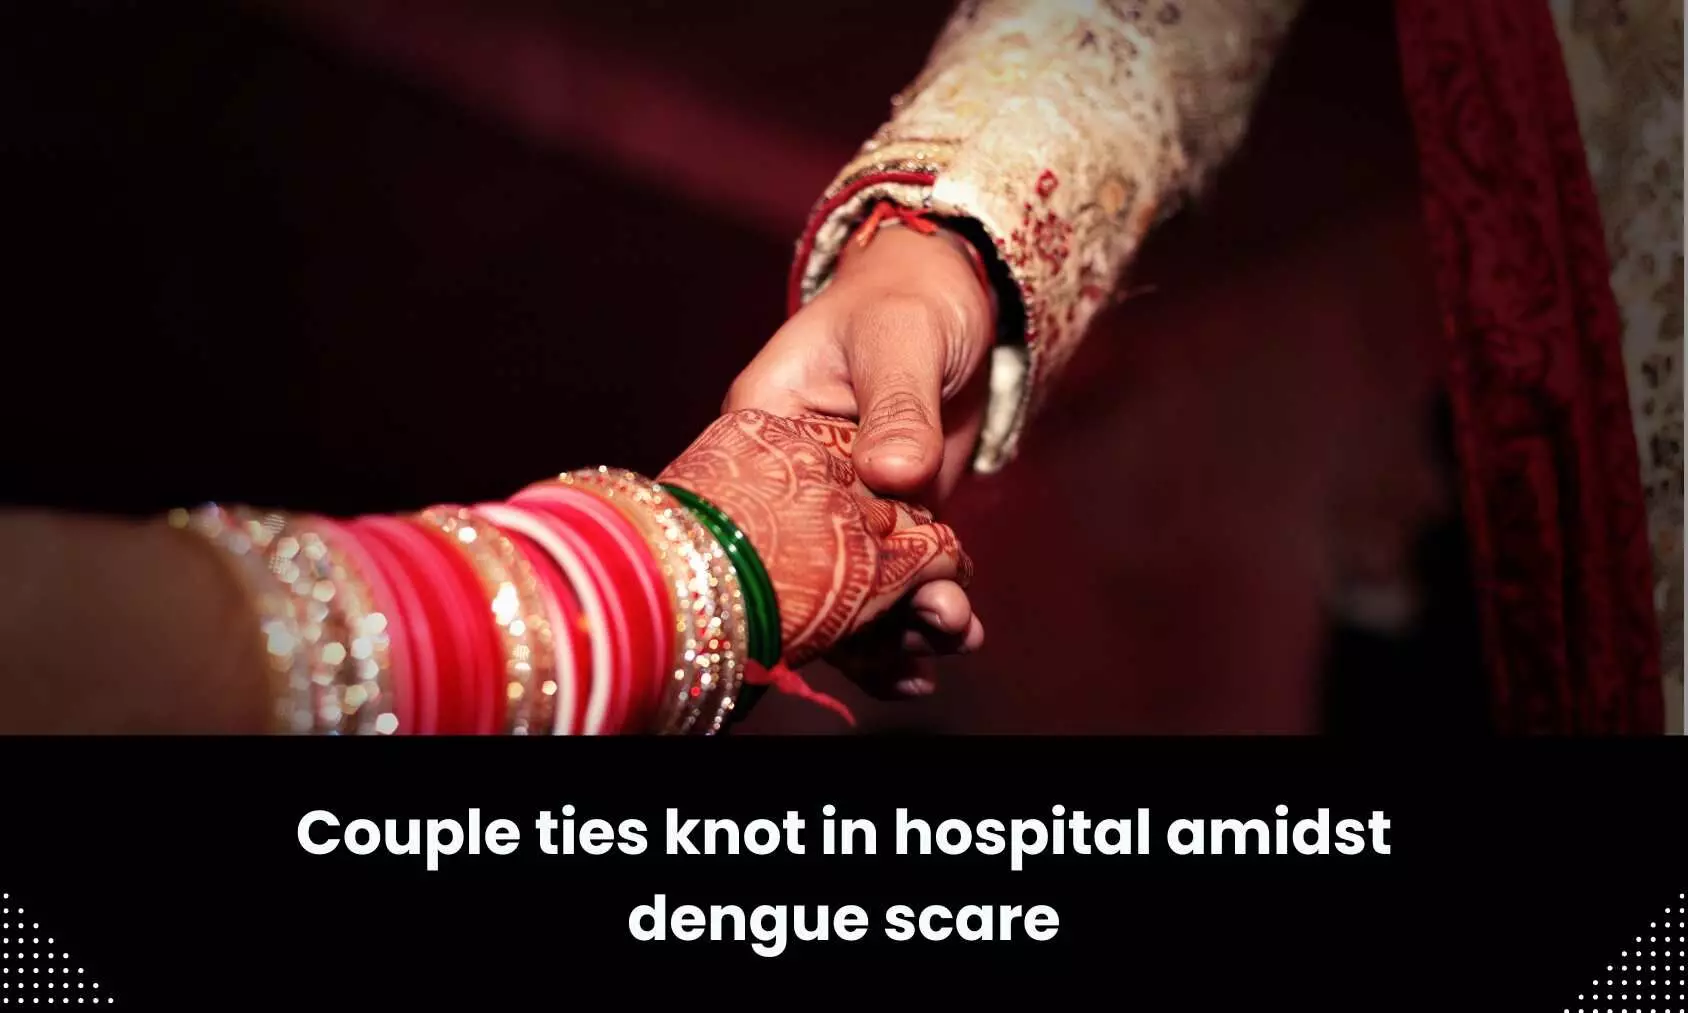 Couple ties knot in hospital amidst dengue scare